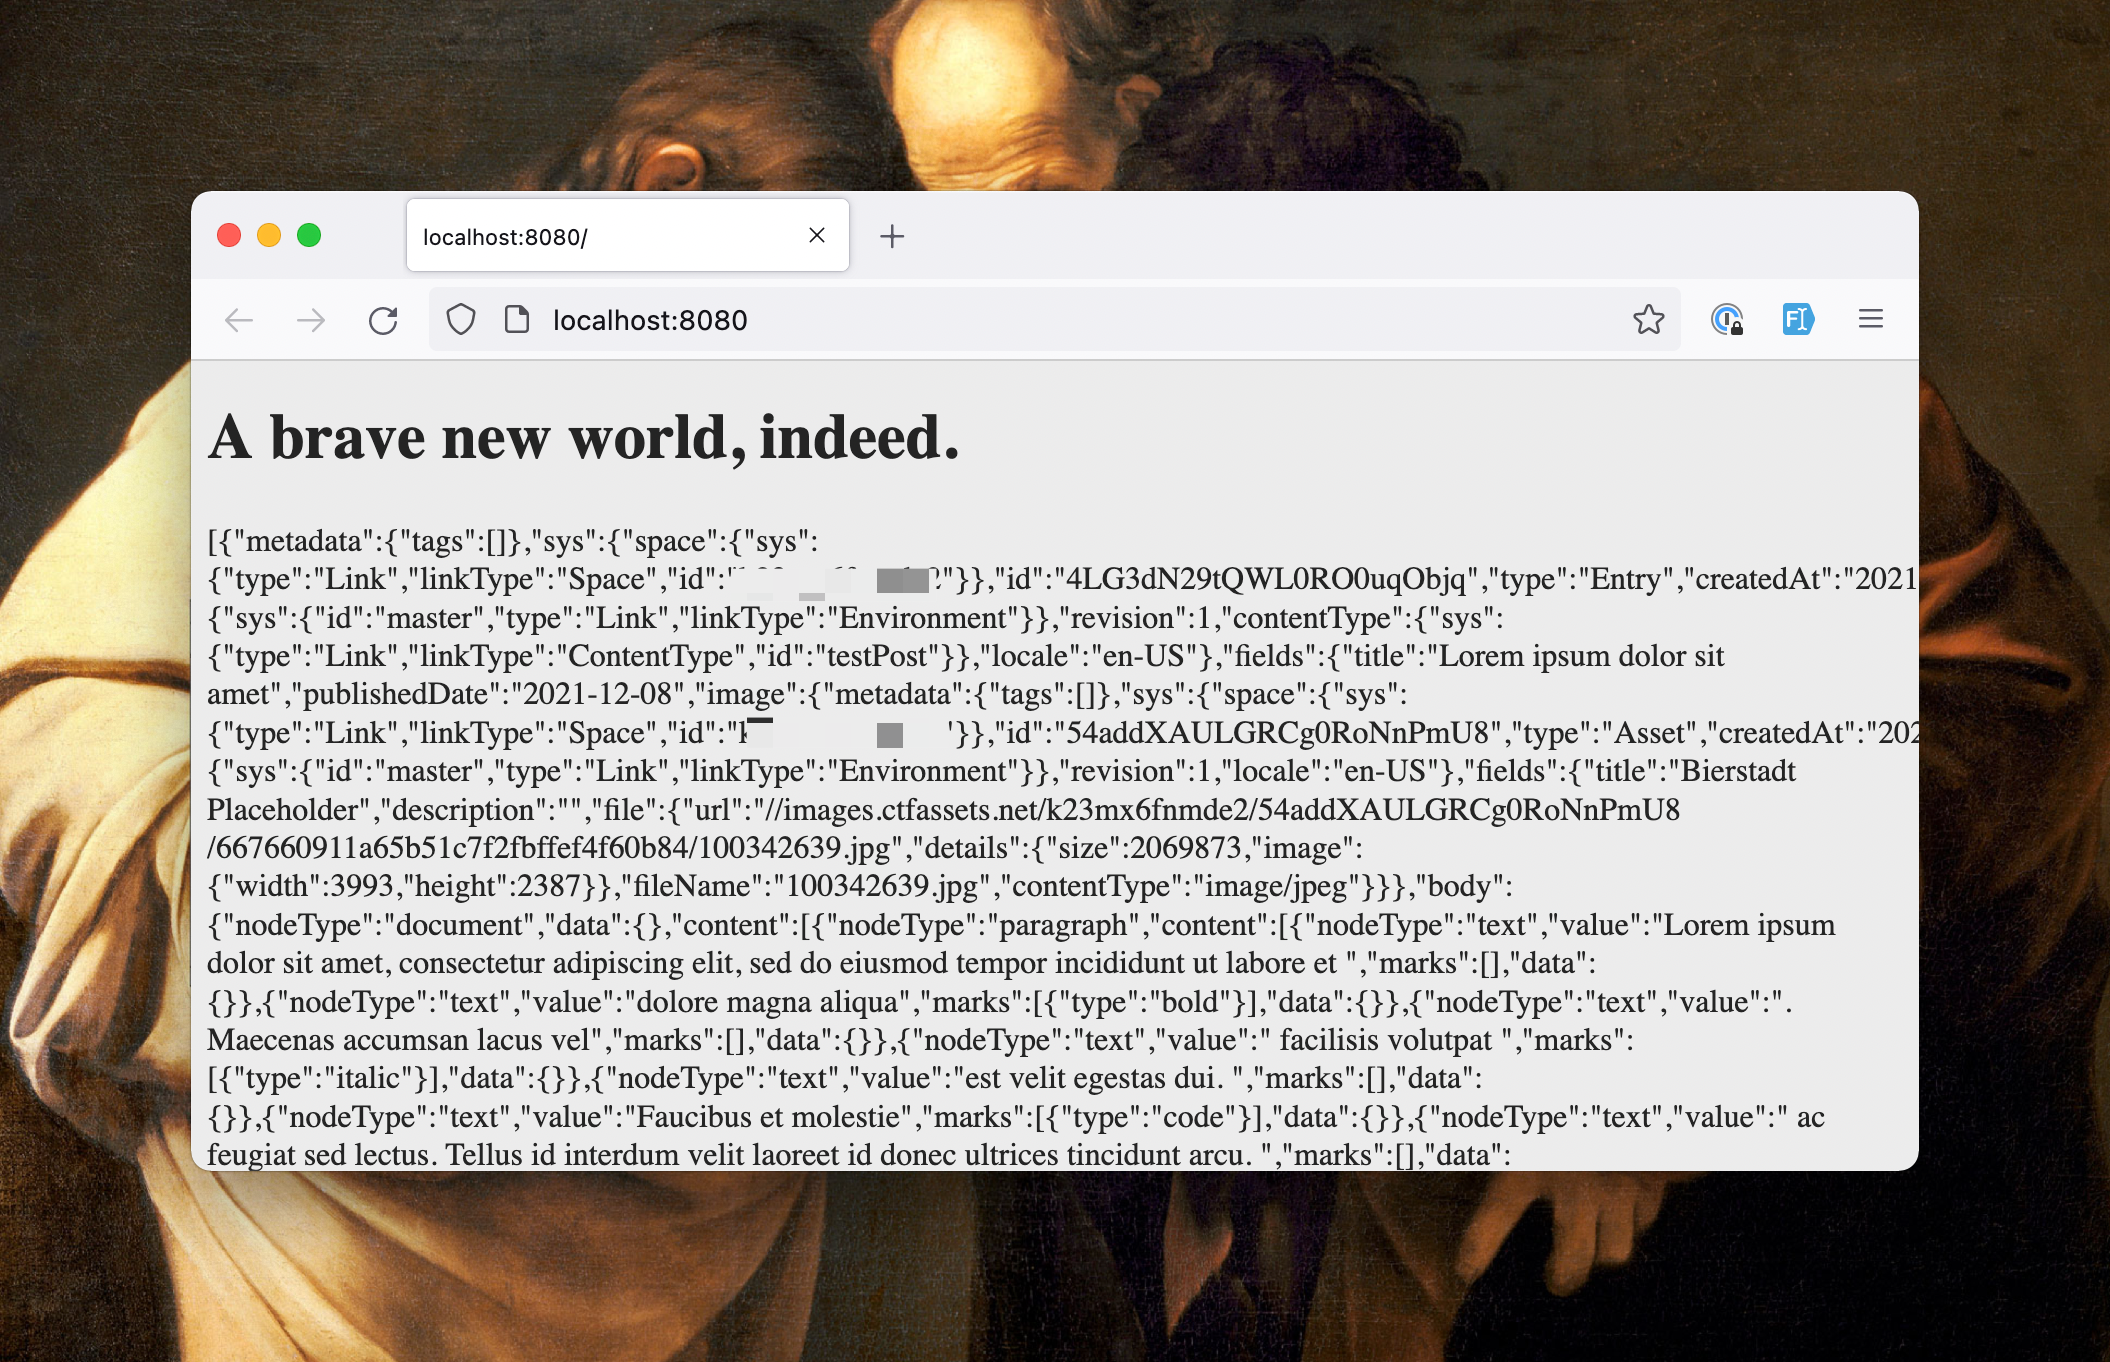 A browser showing a website populated with a headline and some JSON code.